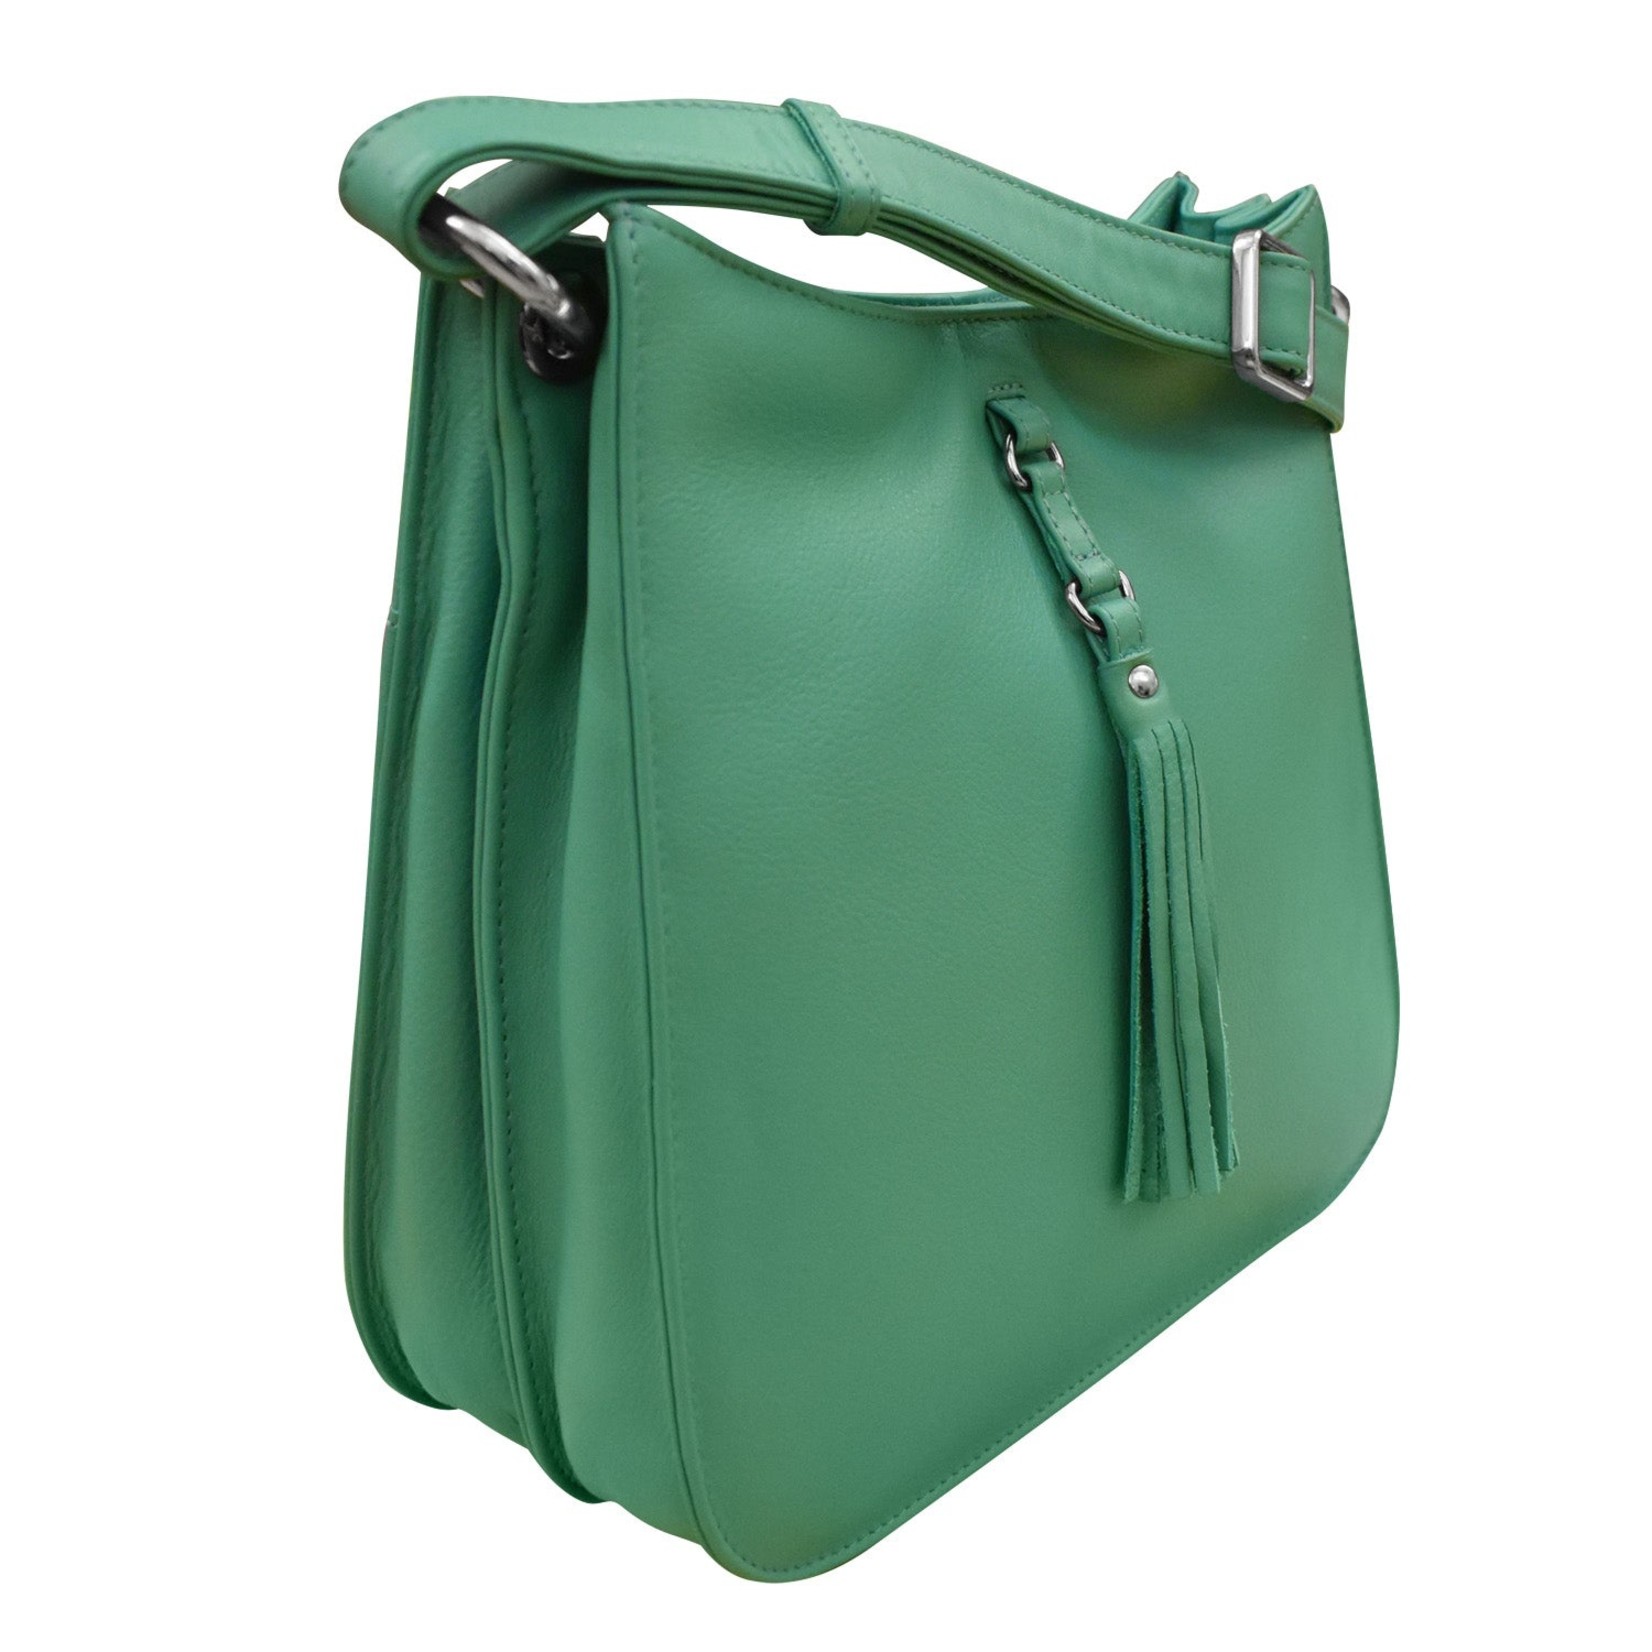 Leather Handbags and Accessories 6888 Turquoise - Feed Bag with Tassel